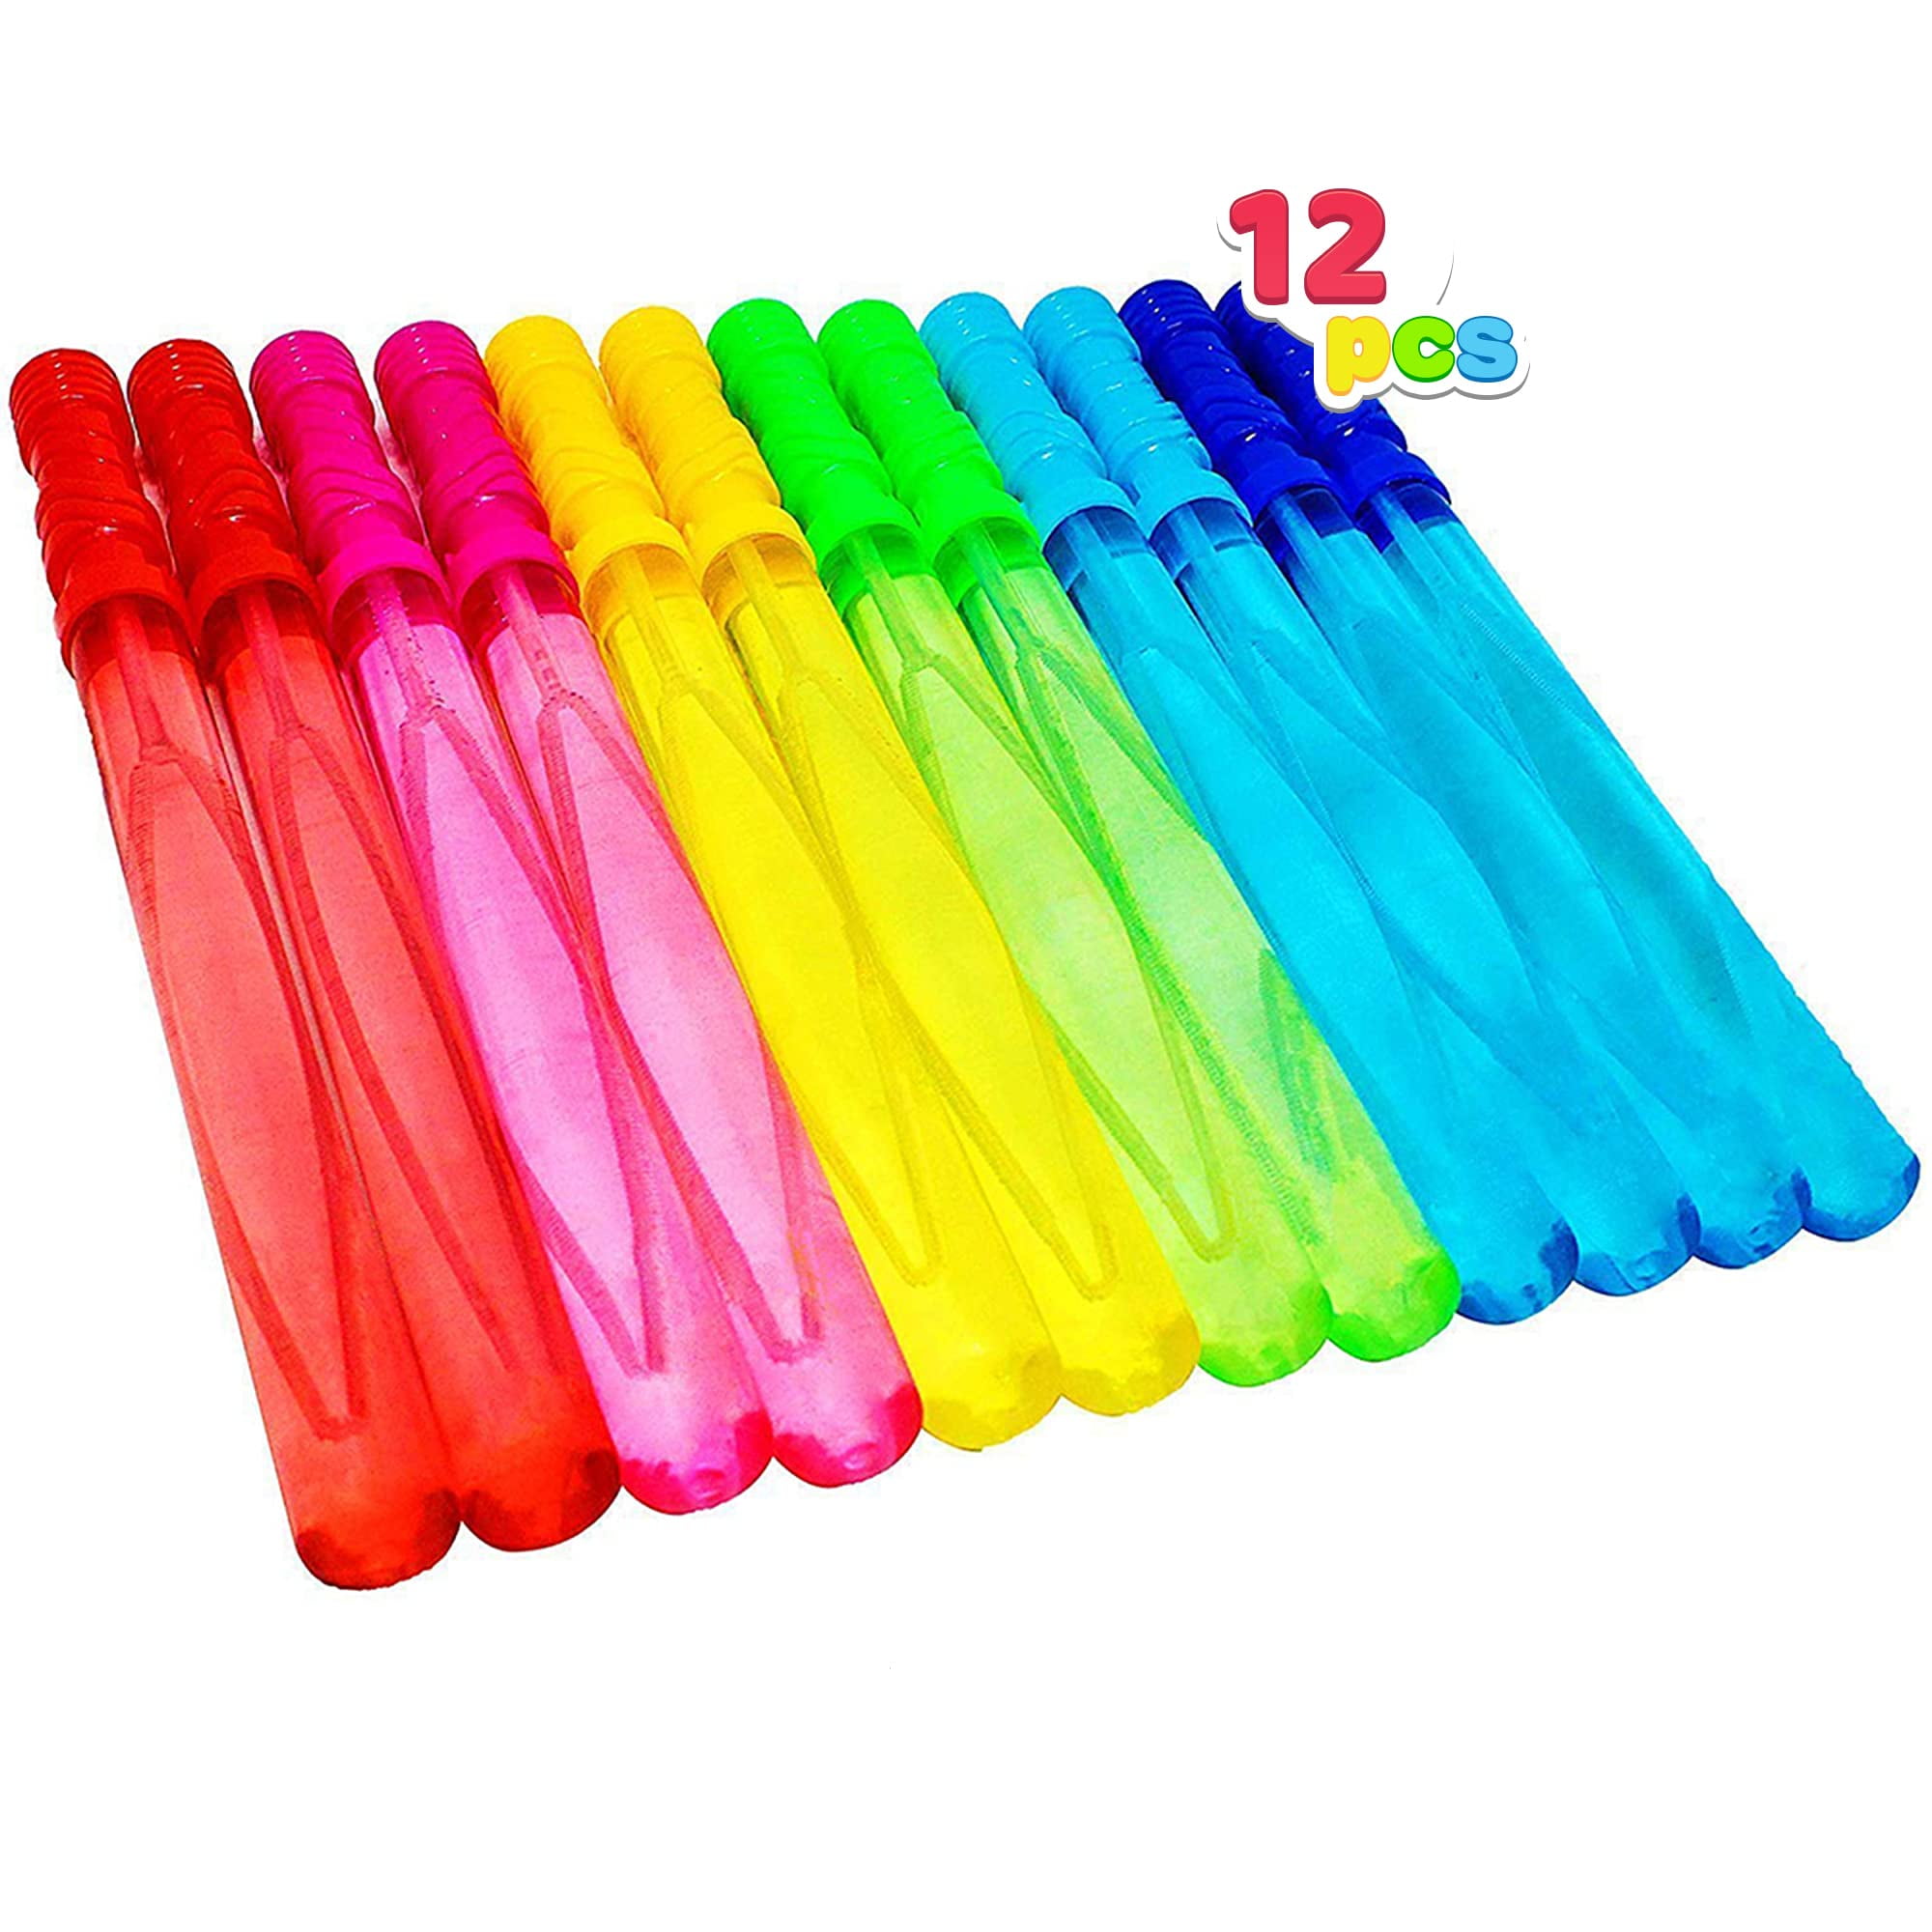 Ratatoys Crayon Bubble Wands for Kids Party Pack, 24 PC Set, 6 Assorted Colors with Long Dip Sticks and Non-Toxic Solution for Large Bubble Blowing